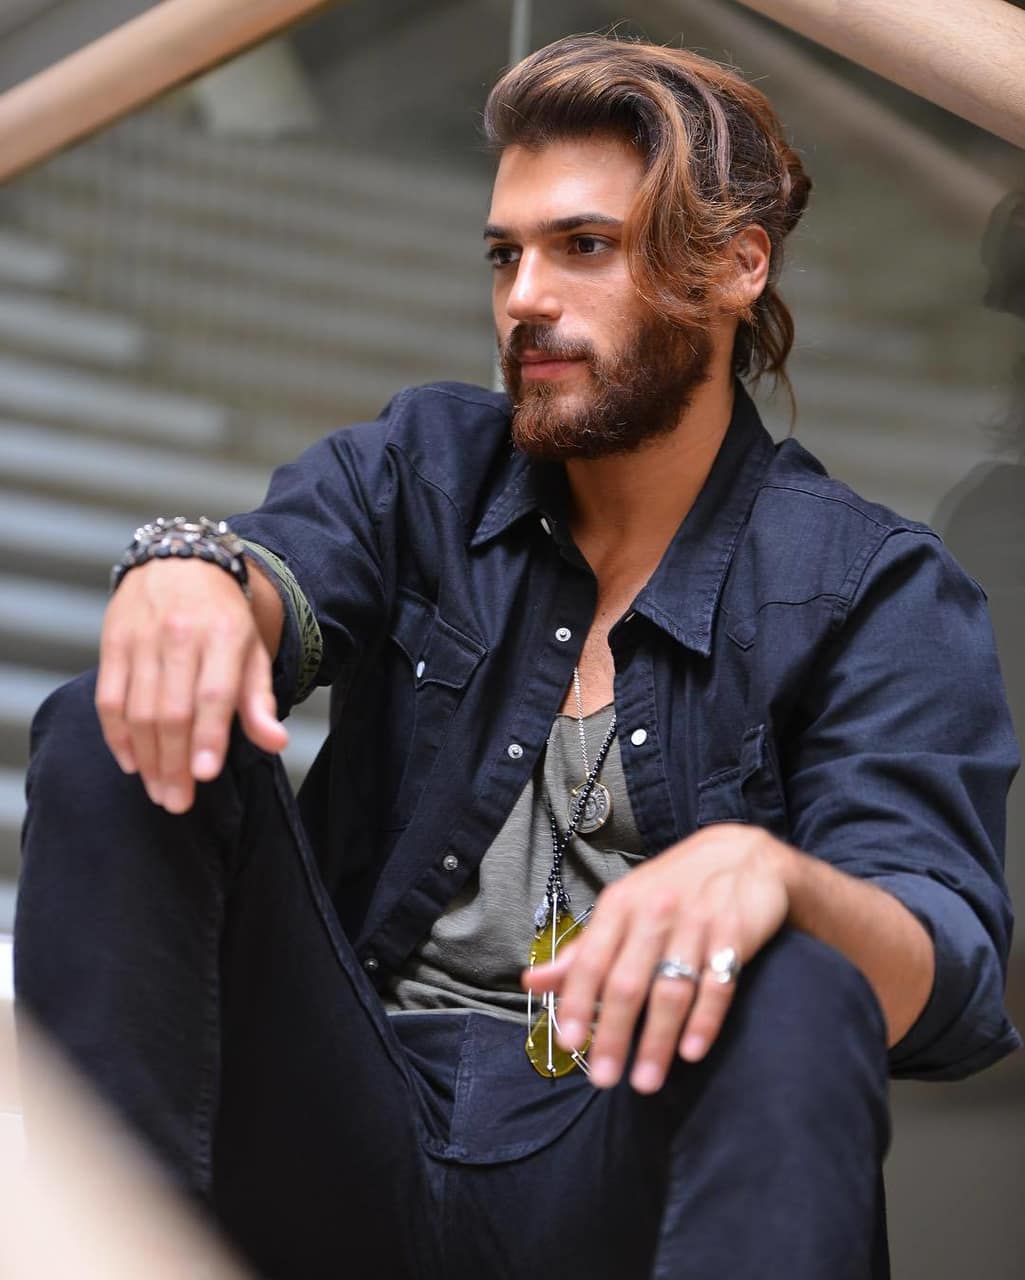 image about Can Yaman. See more about canyaman